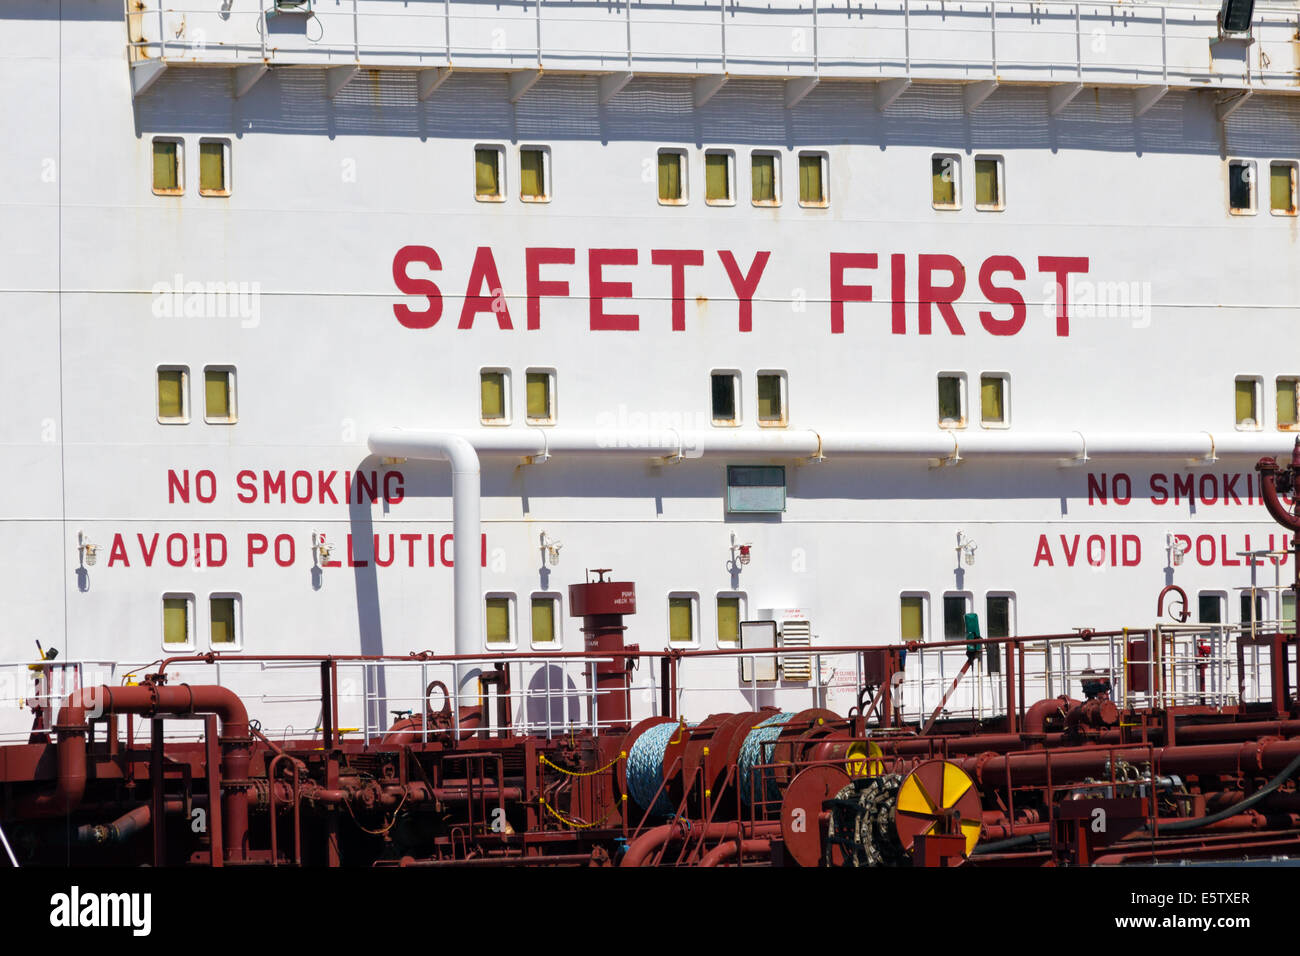 SAFETY FIRST message on an oil tanker Stock Photo